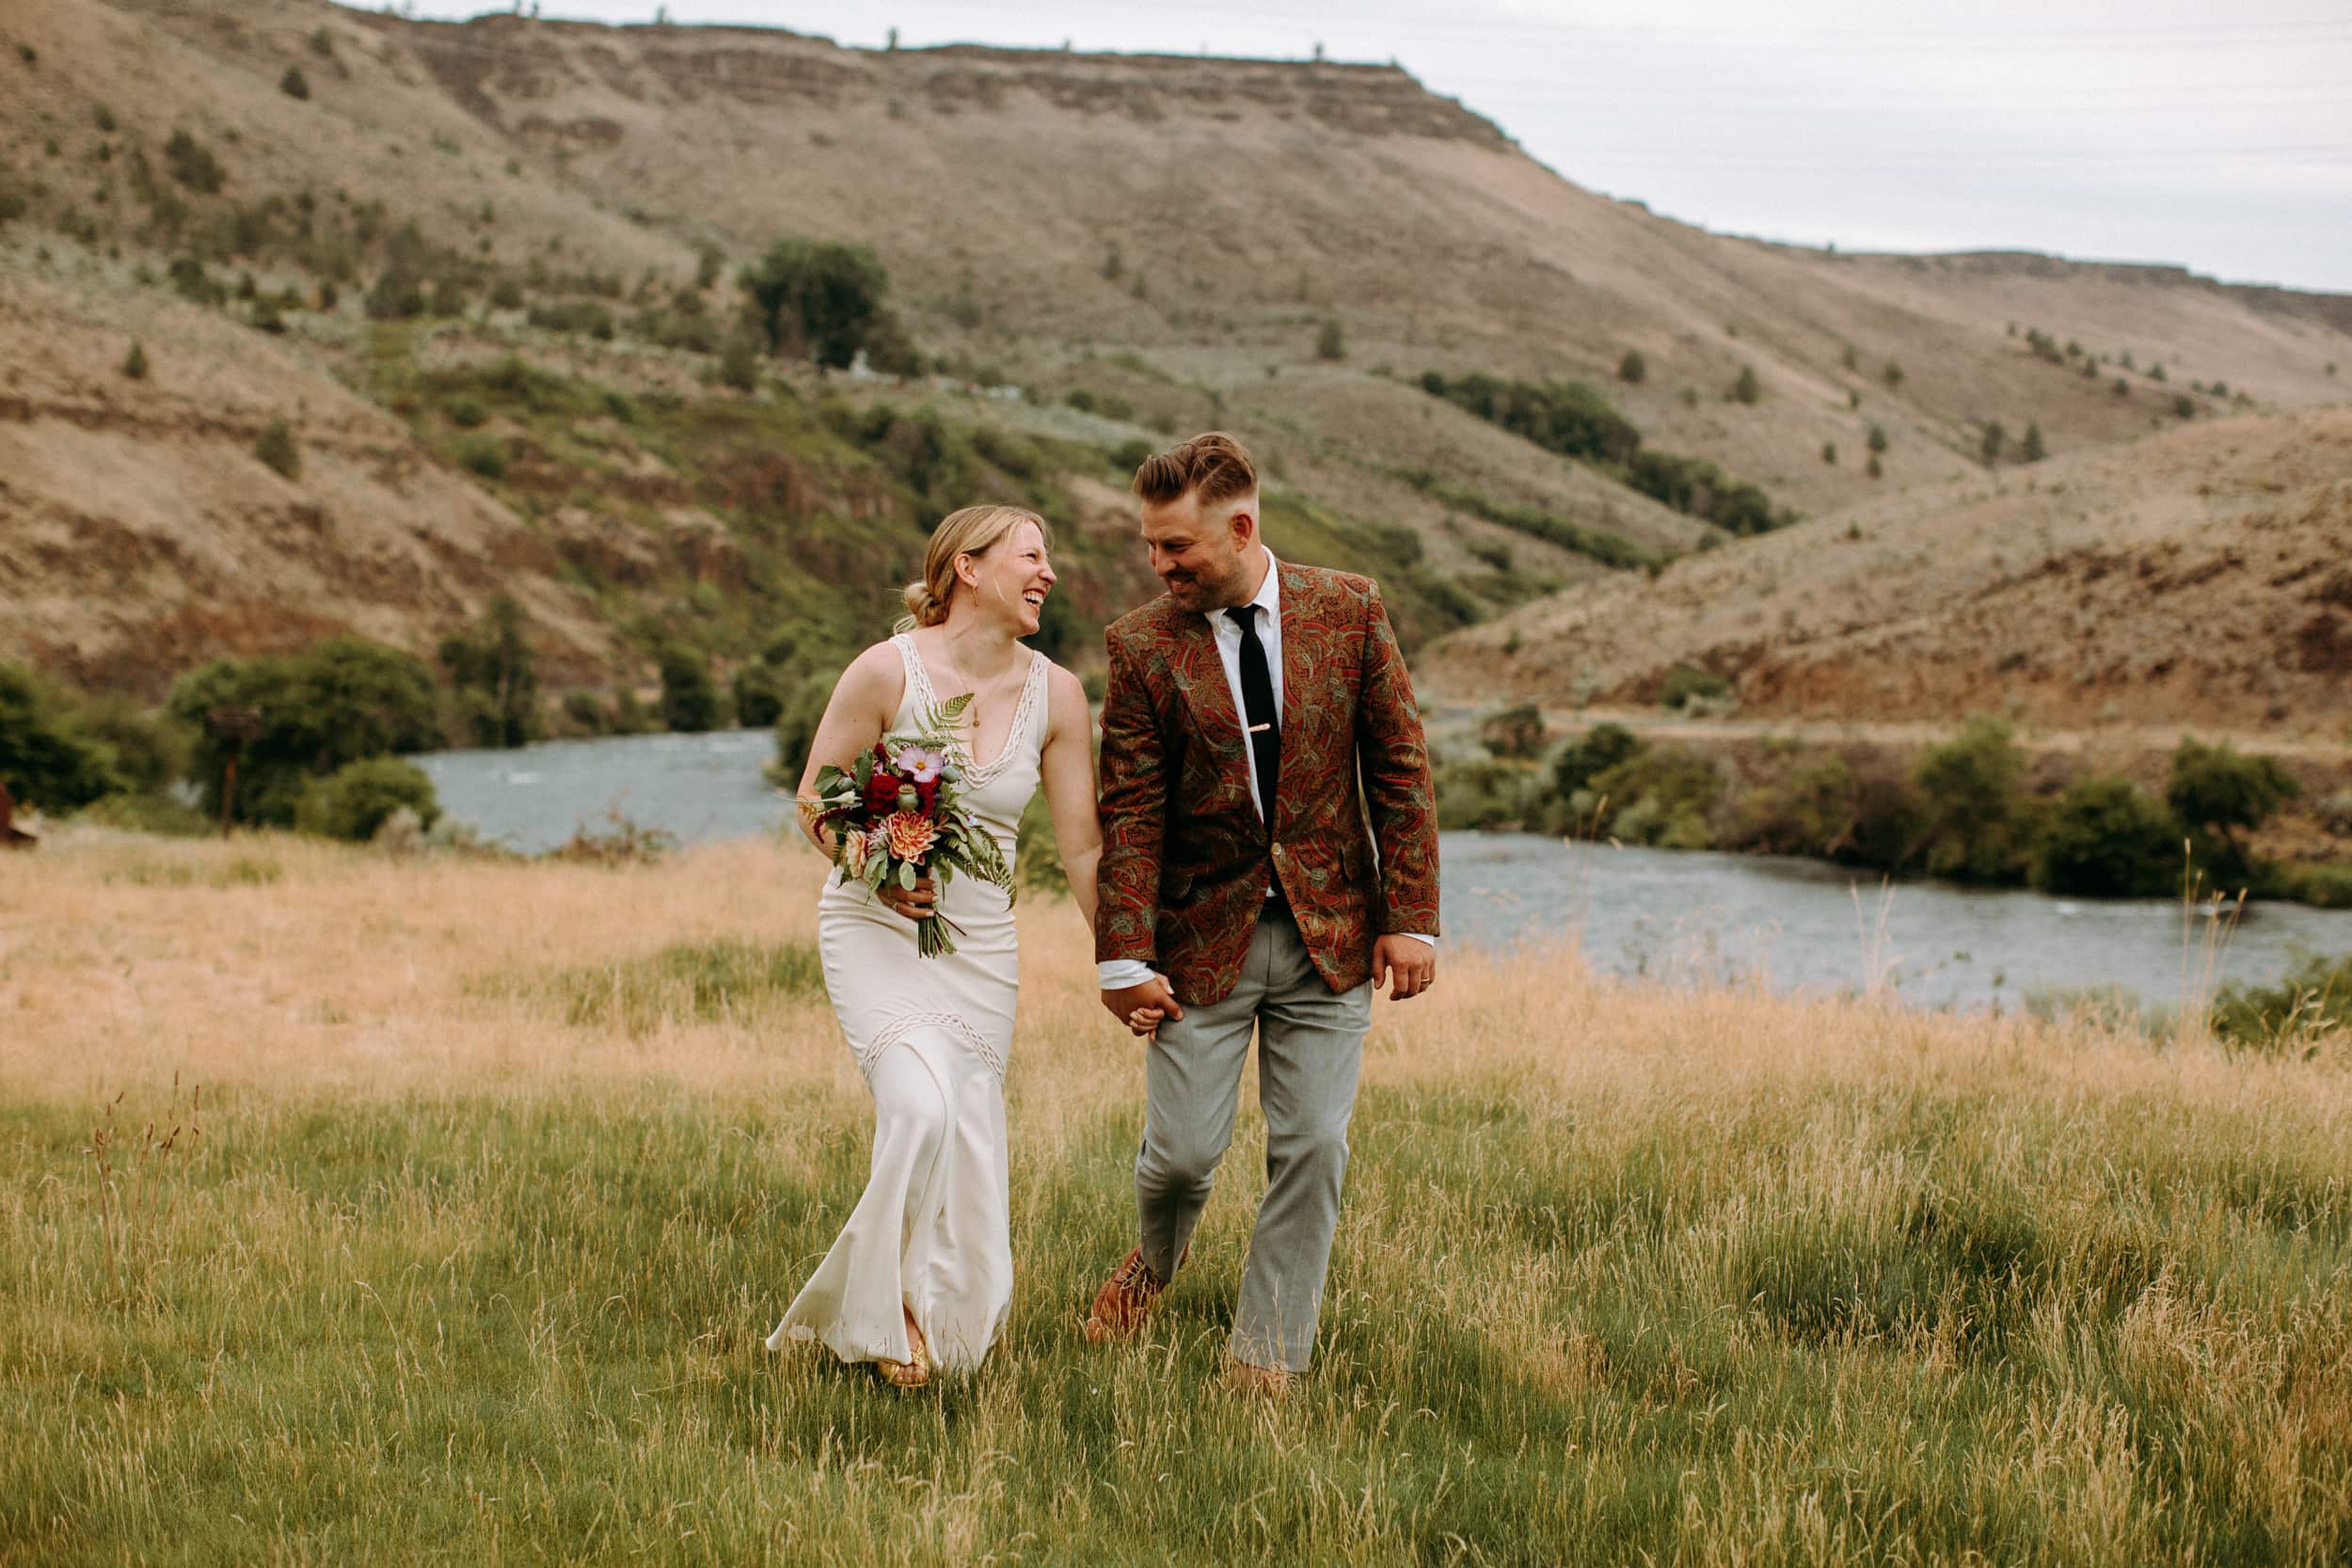 5 Steps To Have A Micro-Wedding or Elopement